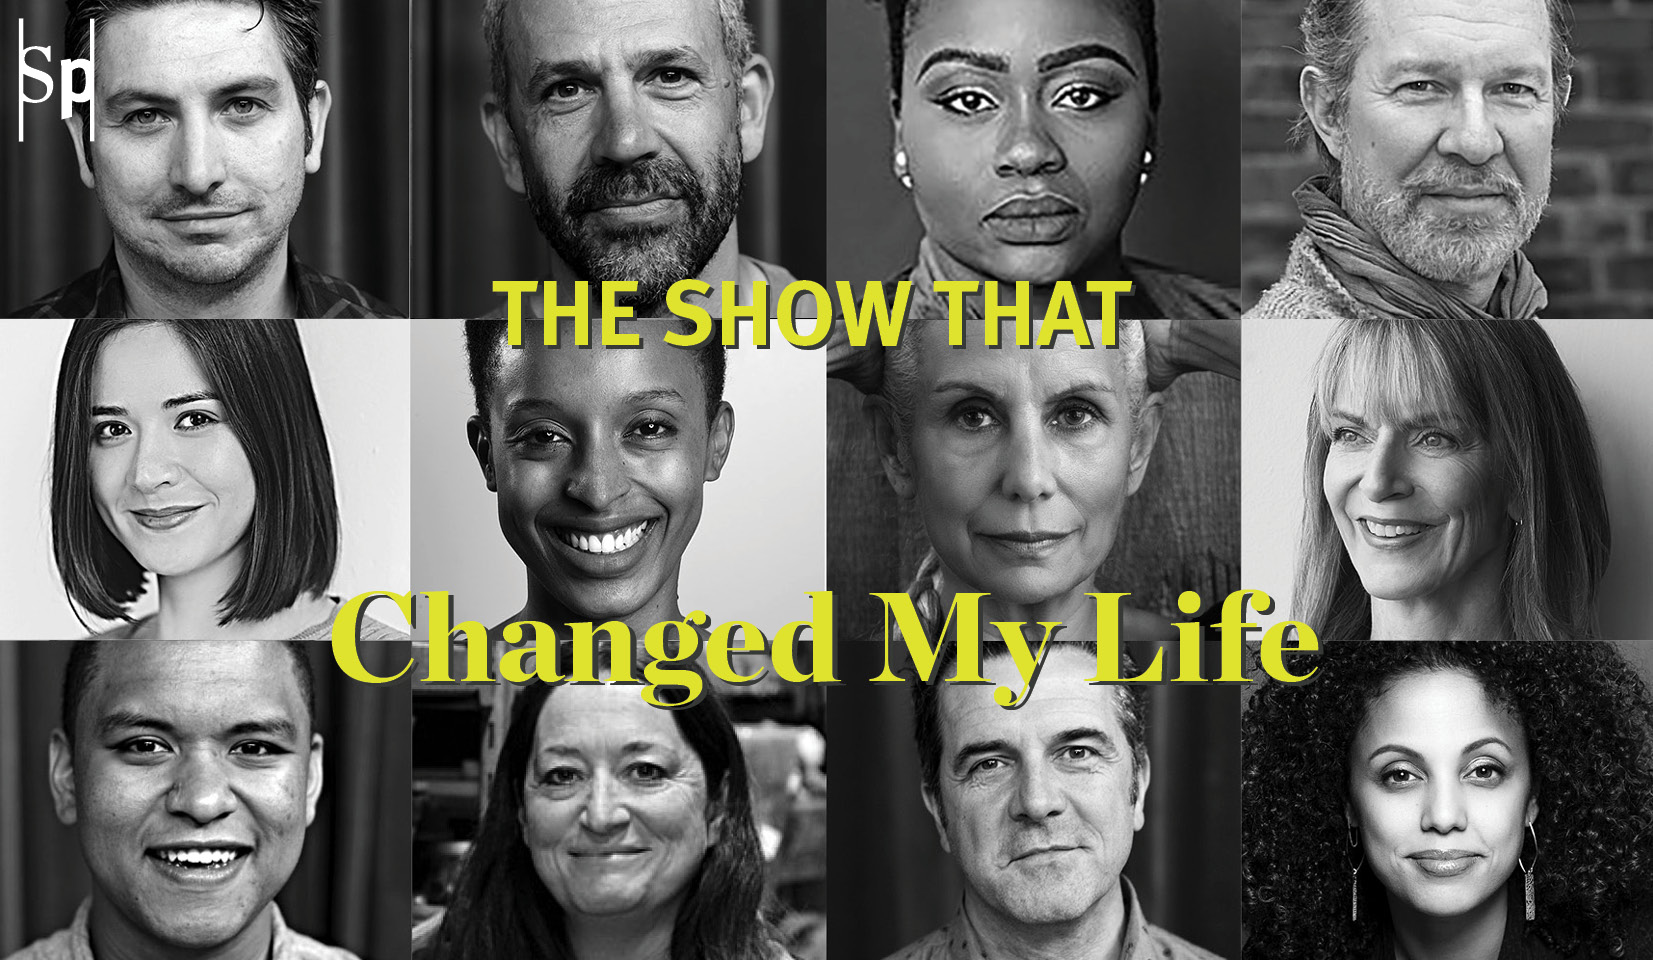 A collage of The Show That Changed My Life's participating artists' headshots overlaid with text reading "The Show That Changed My Life"